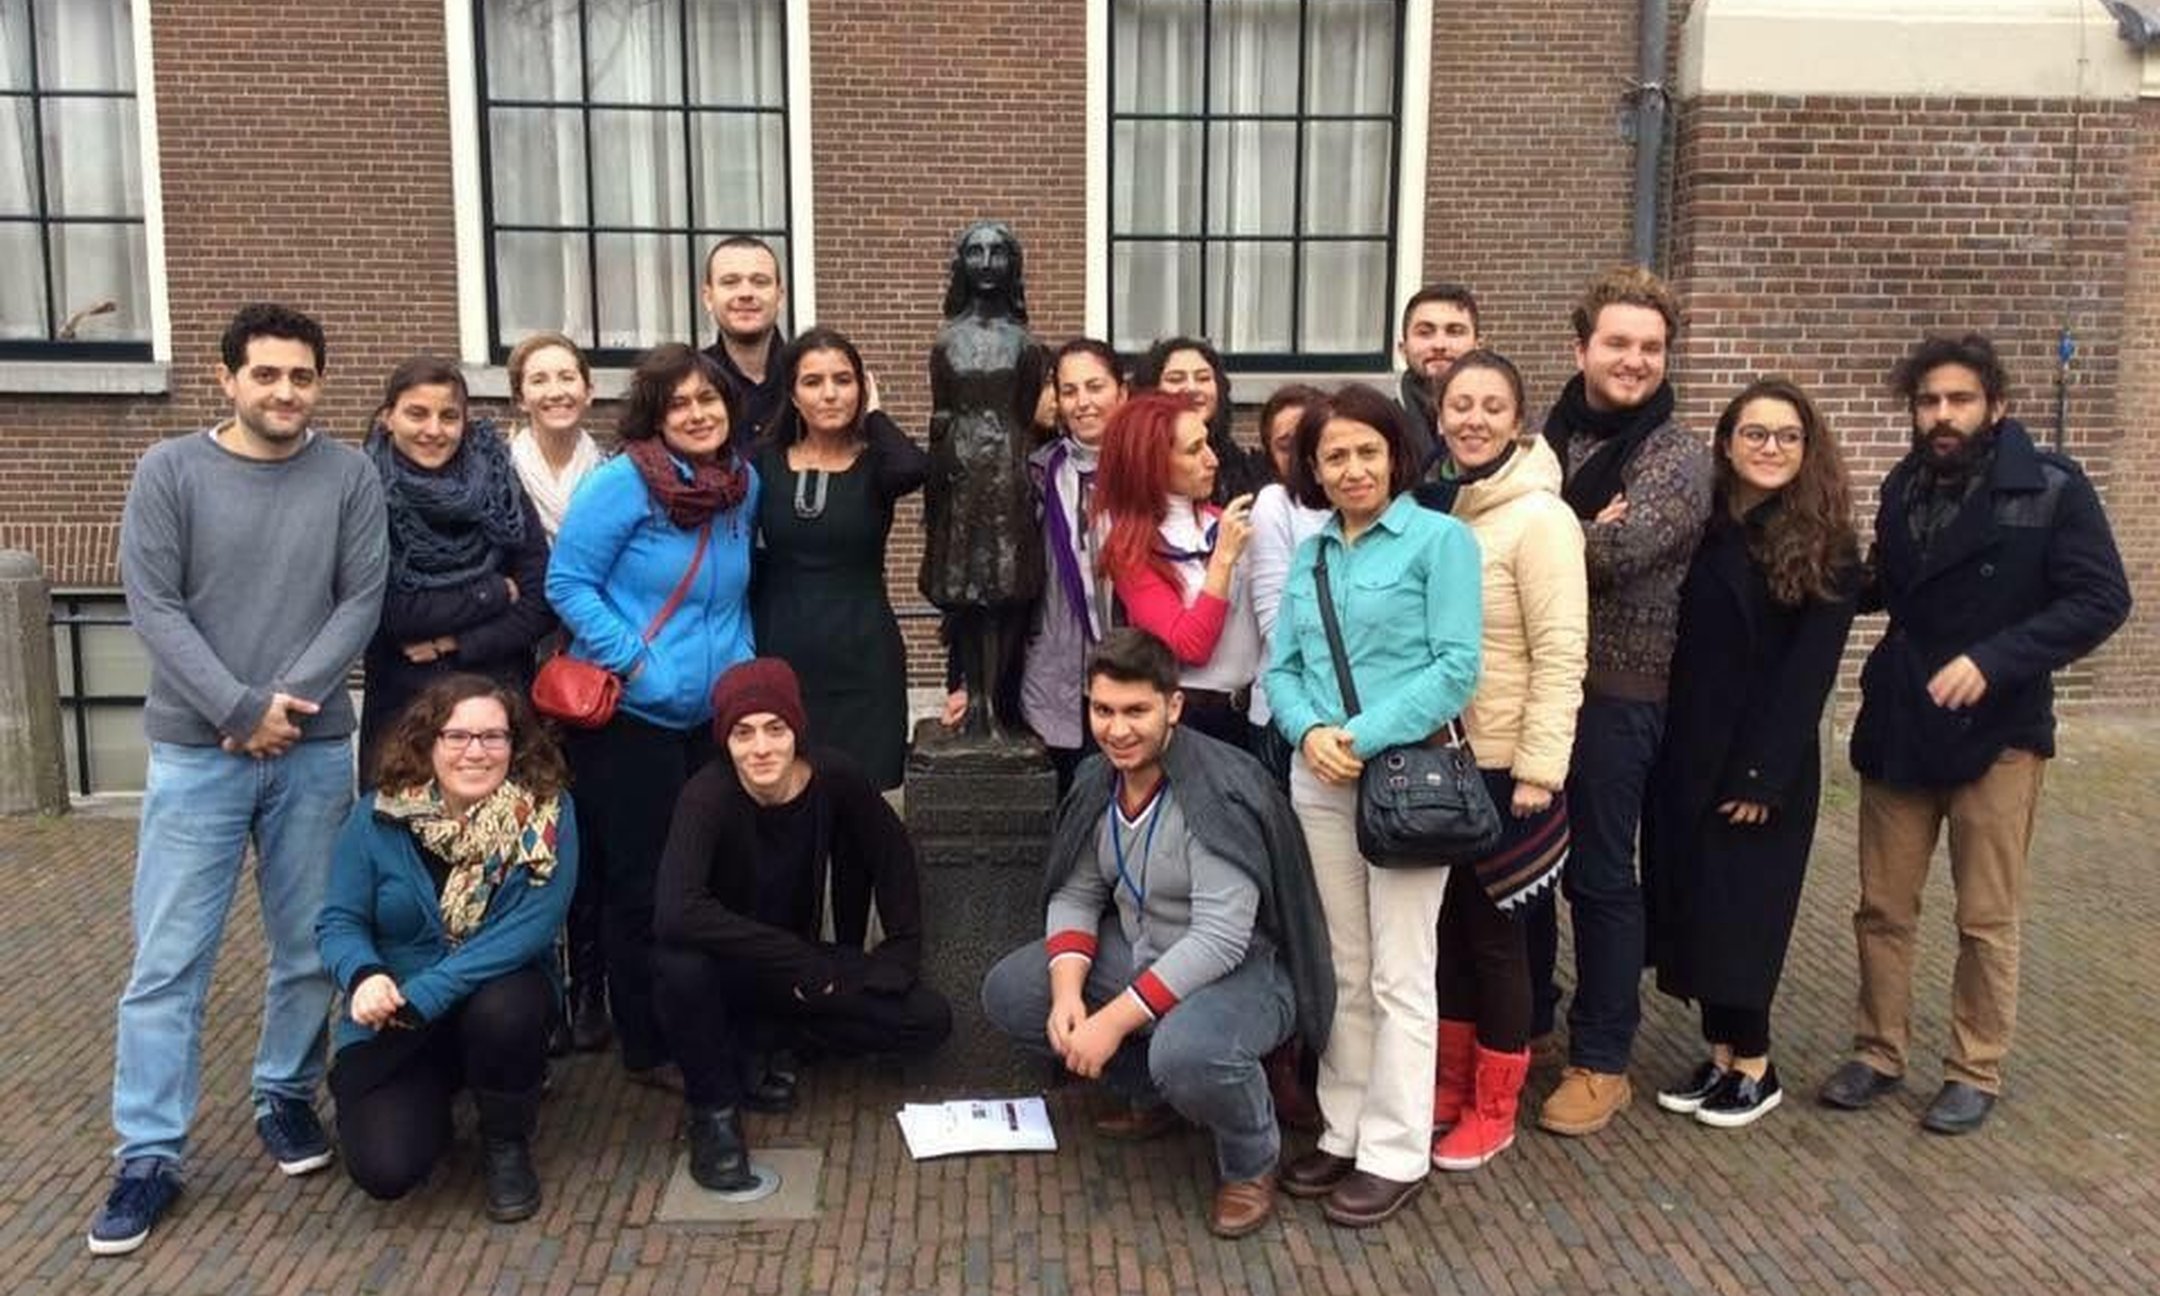 The Turkish youth educators and teacher trainers' visit to the Anne Frank House in Amsterdam